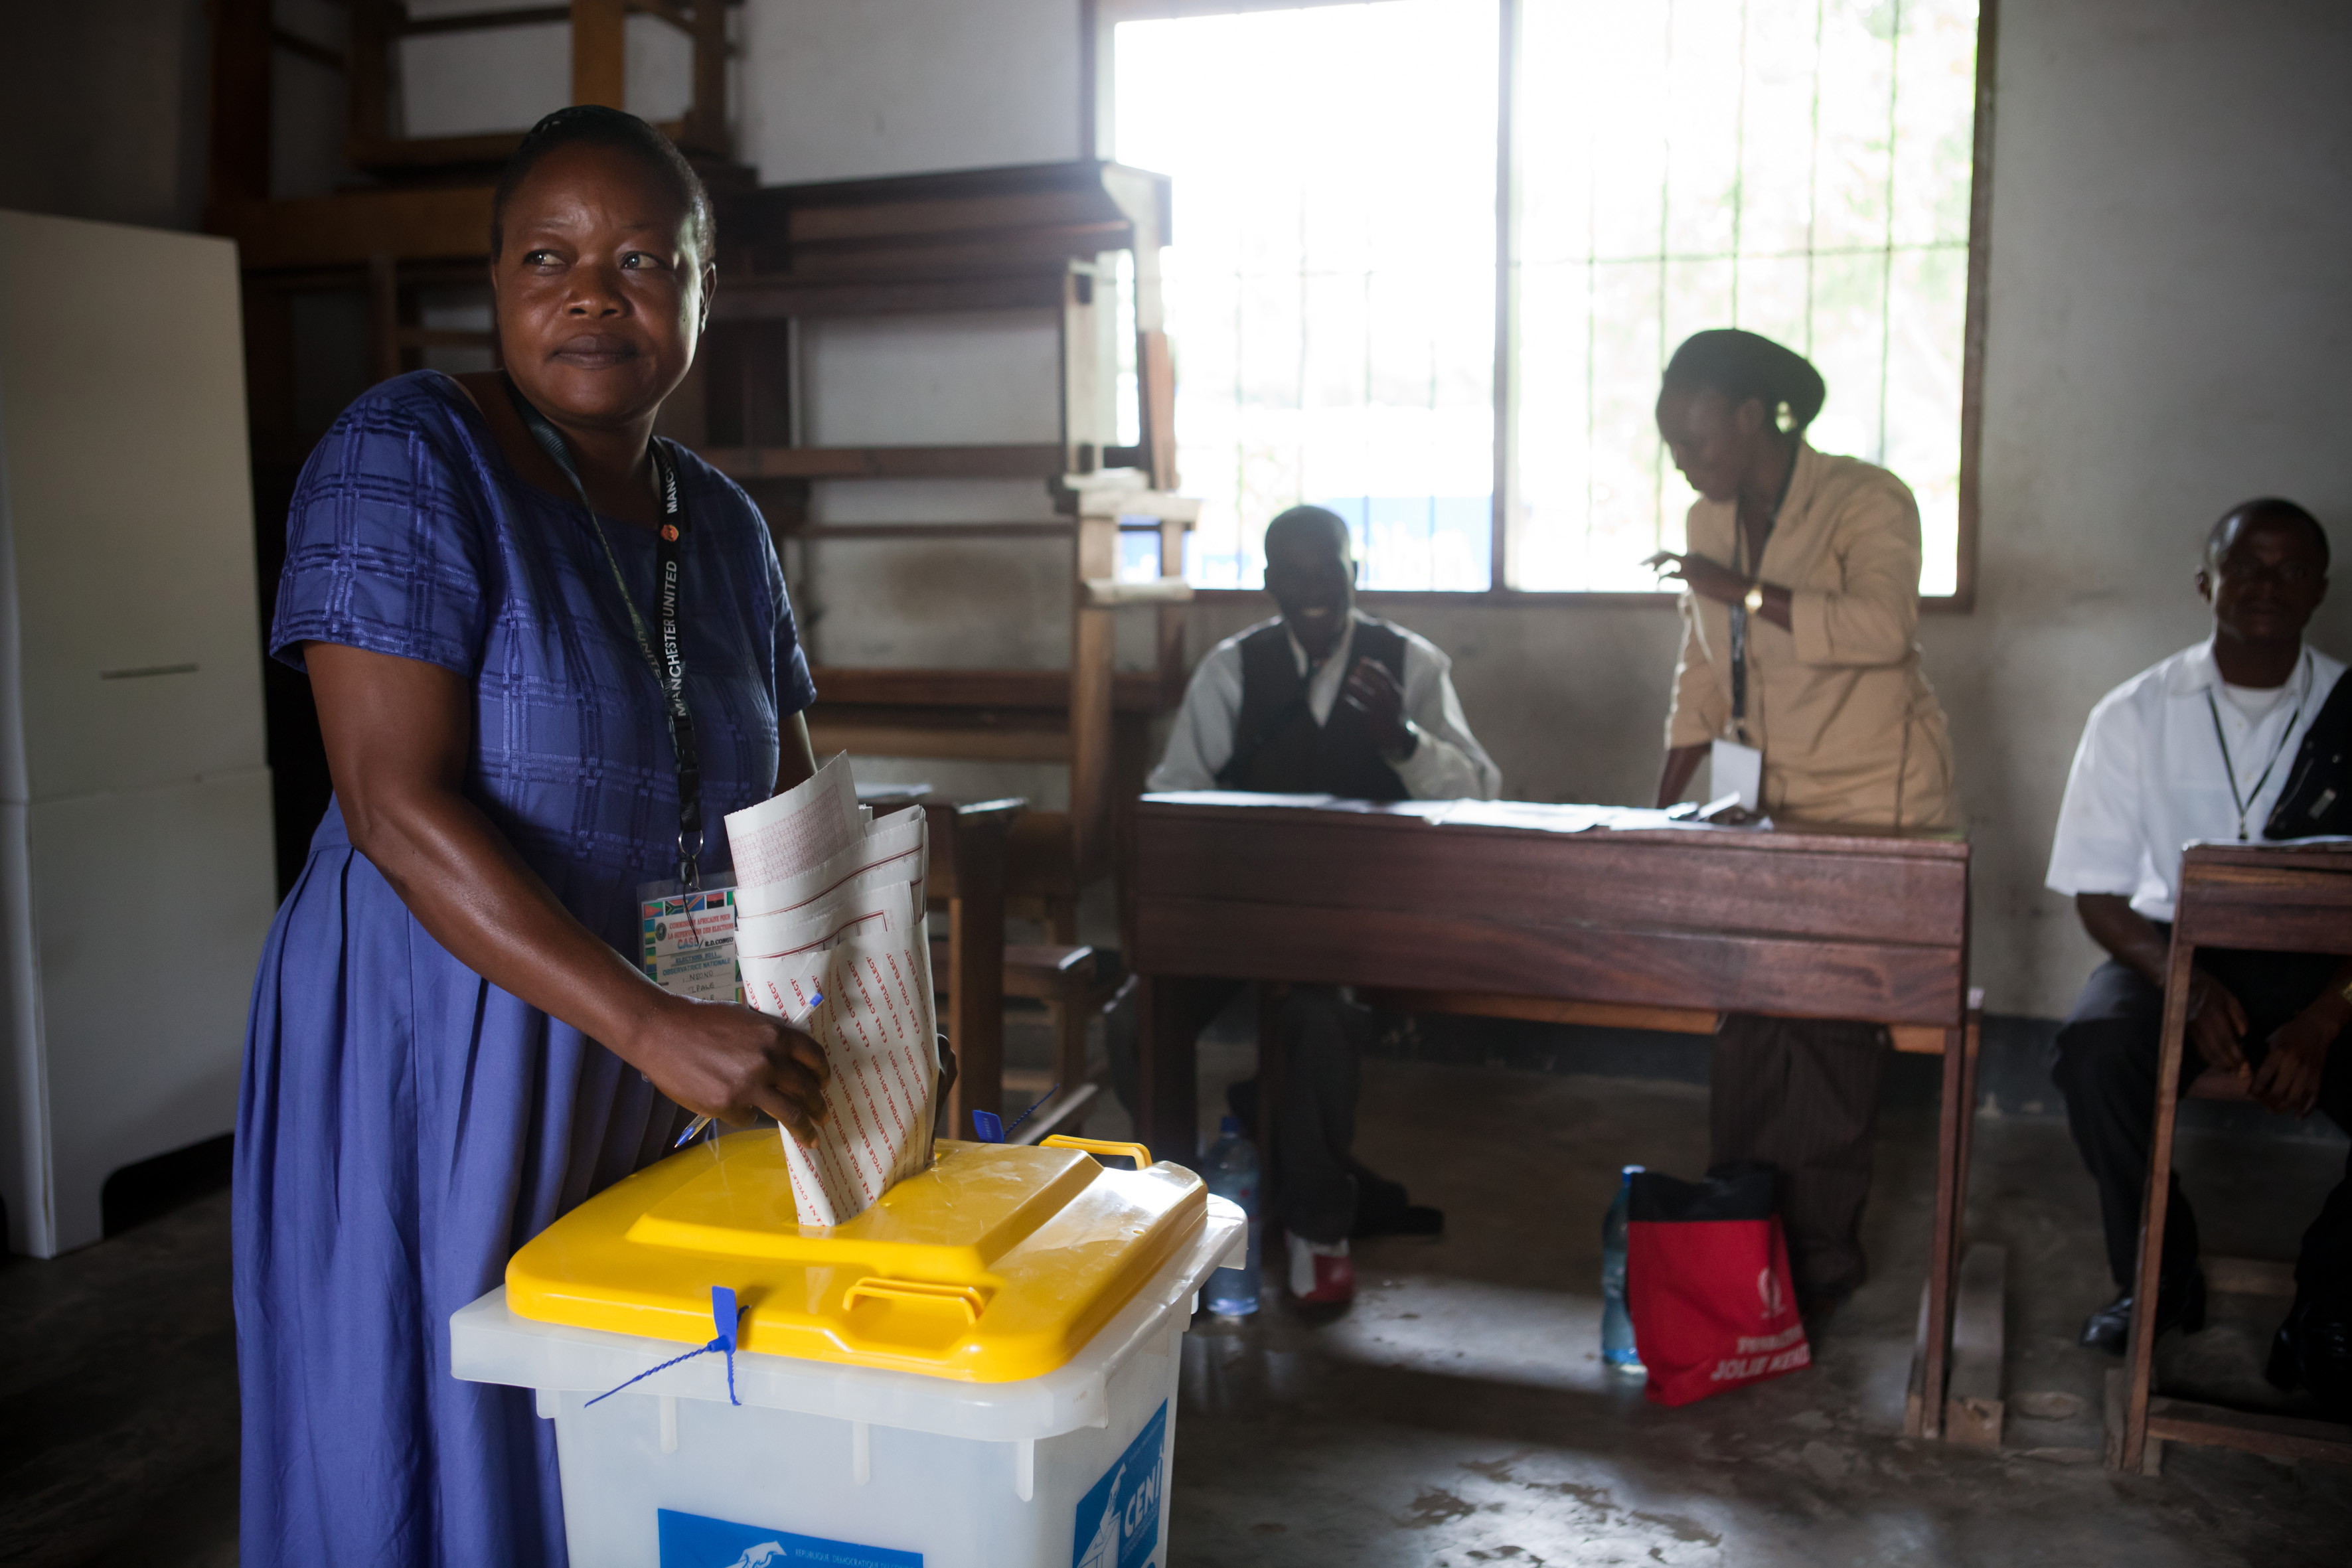 A Congolese woman votes on election day 2011.